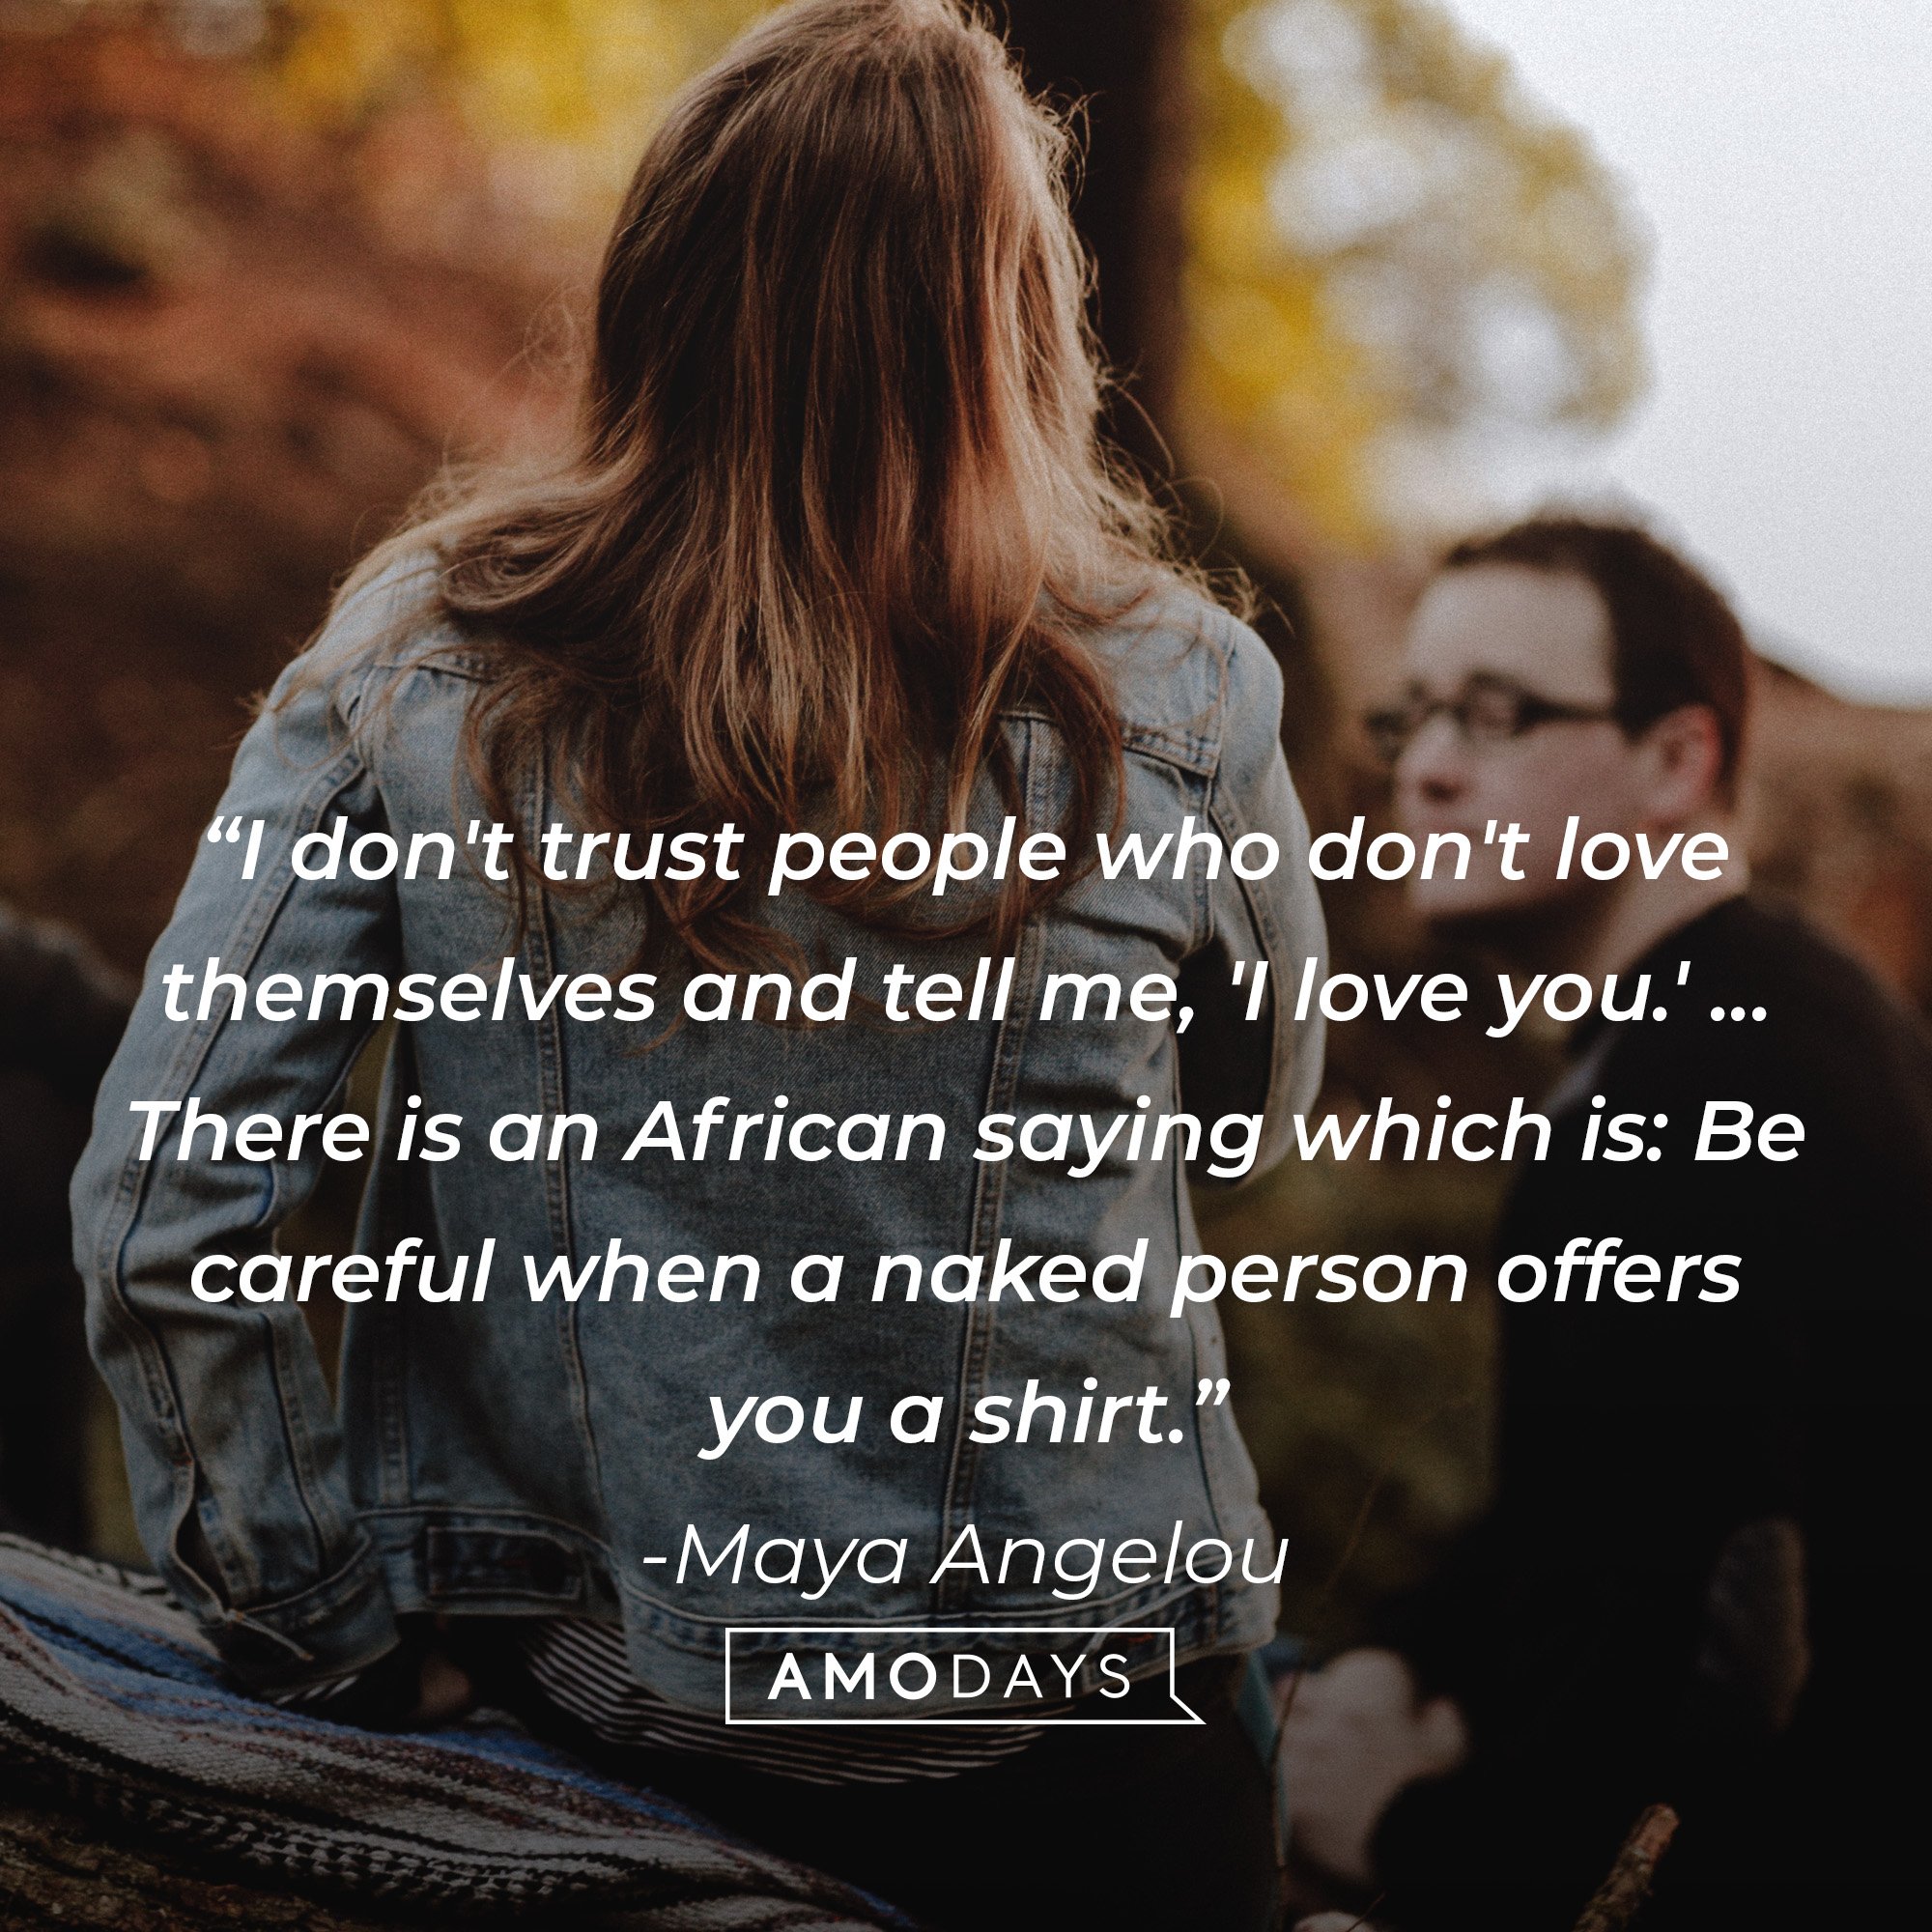 Maya Angelou’s quote: “I don't trust people who don't love themselves and tell me, 'I love you.' ... There is an African saying which is: Be careful when a naked person offers you a shirt.” | Image: AmoDays